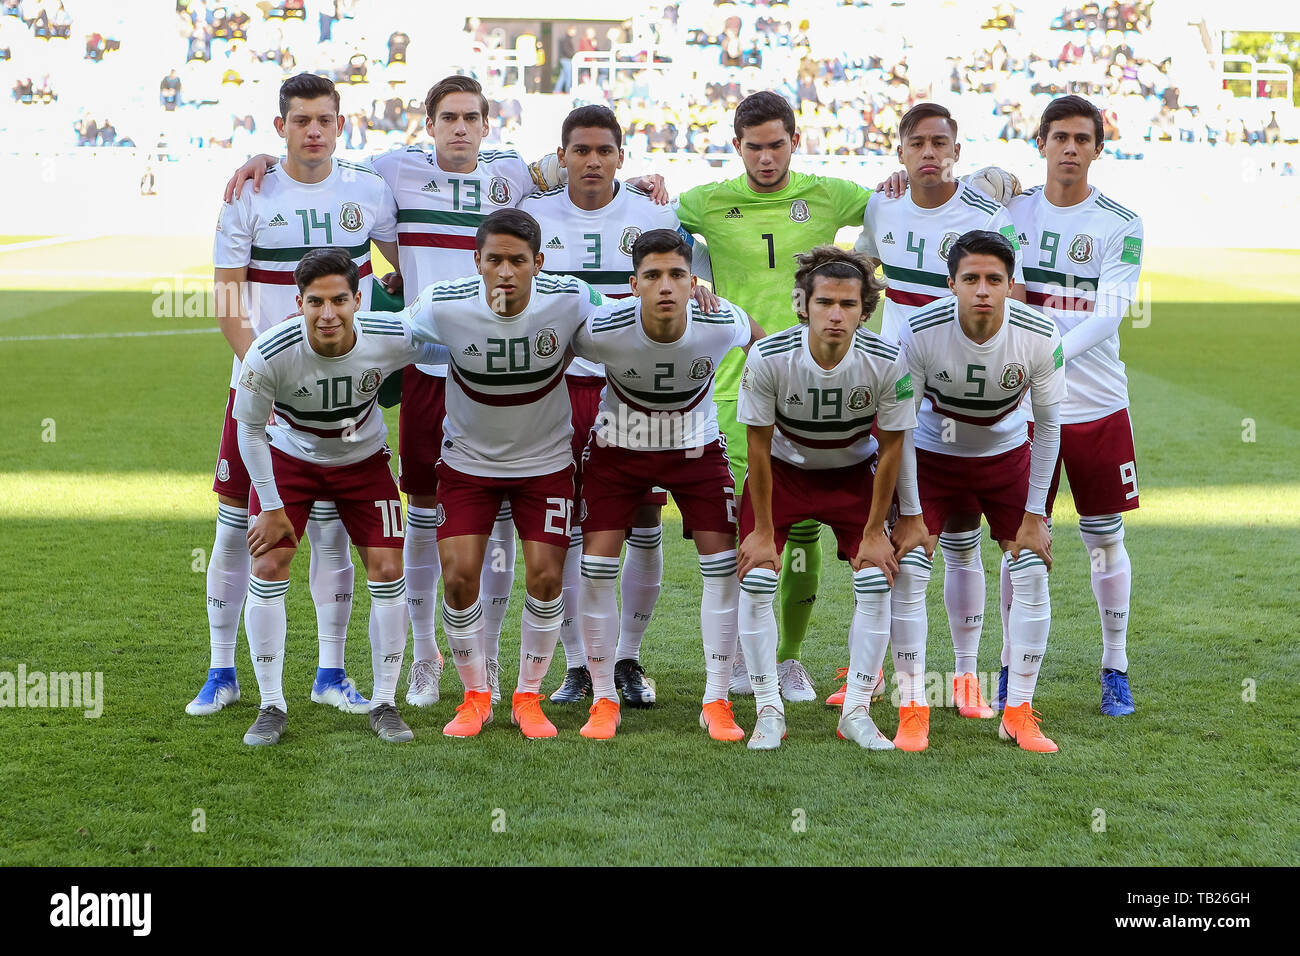 Gdynia, Poland. 29th May, 2019. National team of Mexico are seen pose for a photo before the start of the match during FIFA U-20 World Cup match between Ecuador and Mexico (GROUP B) in Gdynia. (Final score; Ecuador 1:0 Mexico ) Credit: Tomasz Zasinski/Alamy Live News Stock Photo